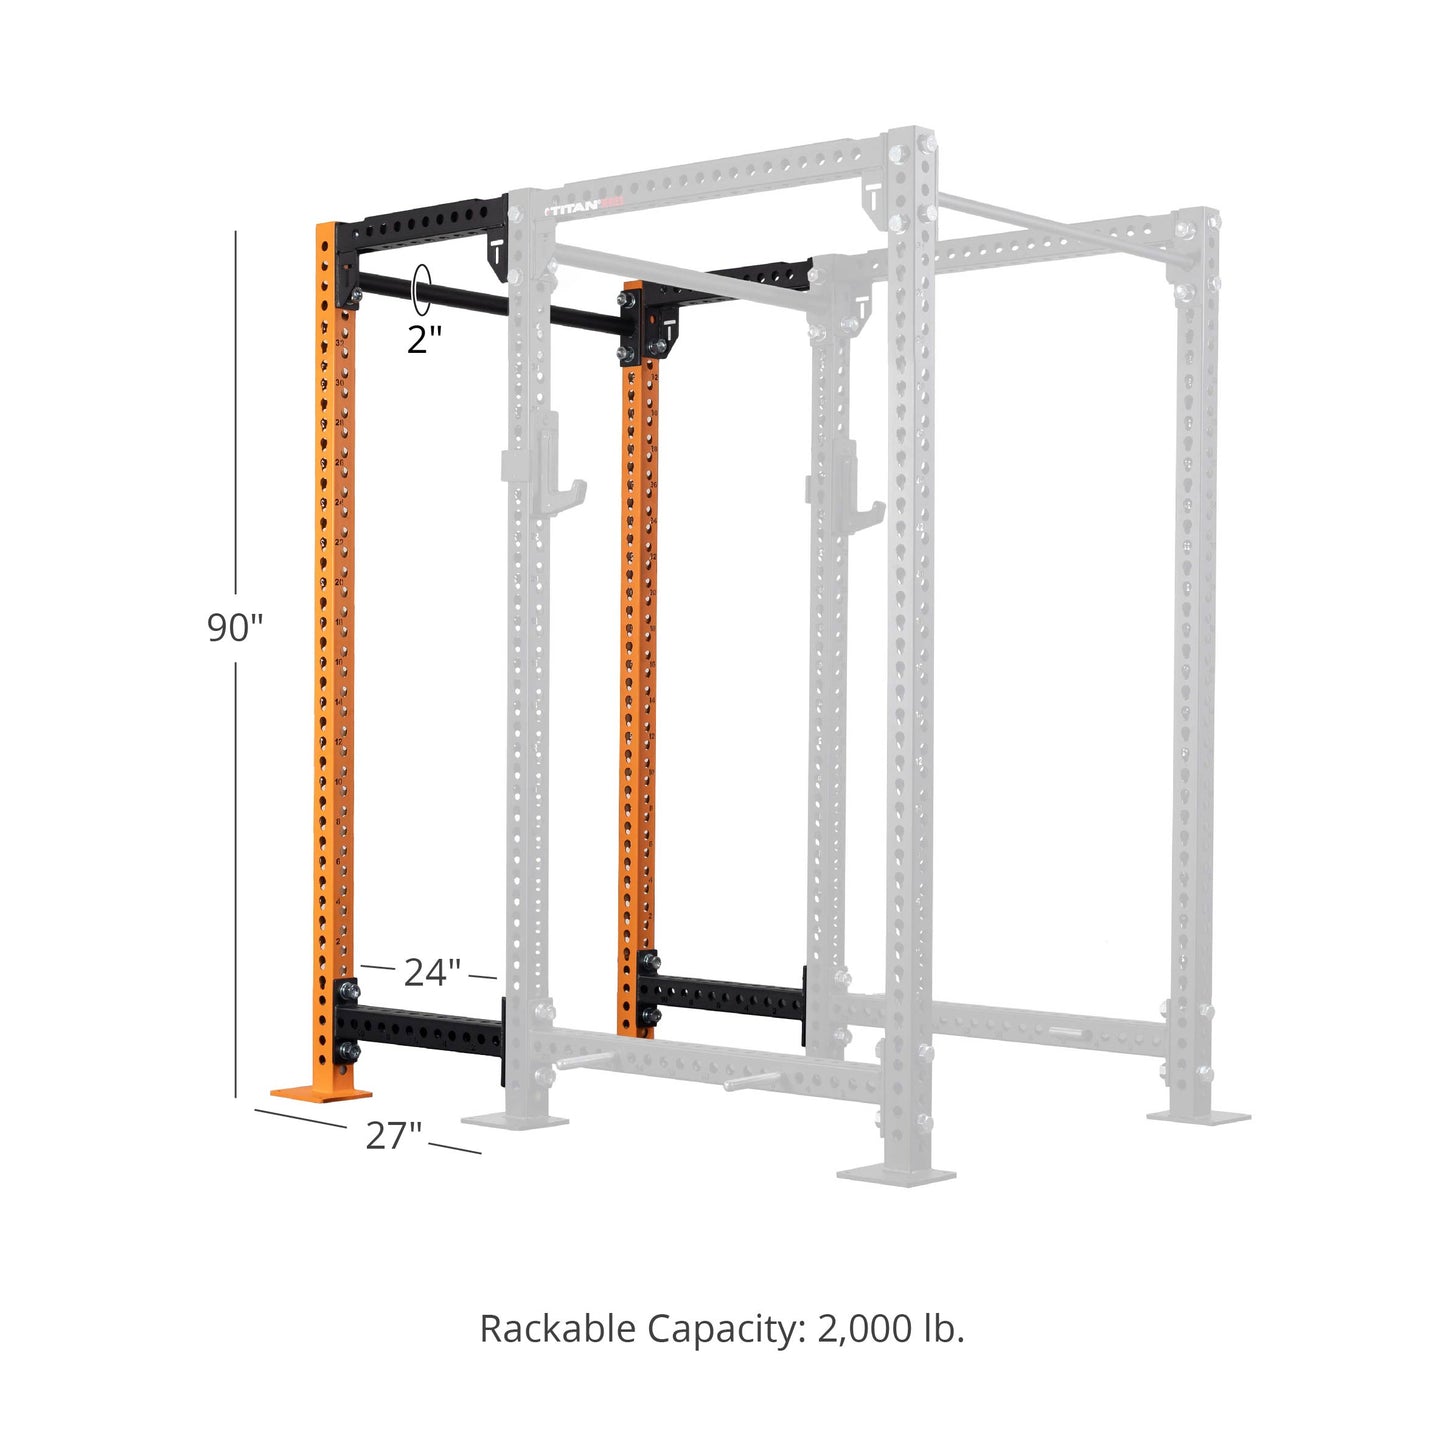 TITAN Series 24" Extension Kit - Extension Color: Orange - Extension Height: 90" - Crossmember: 2" Fat Pull-Up Bar | Orange / 90" / 2" Fat Pull-Up Bar - view 94